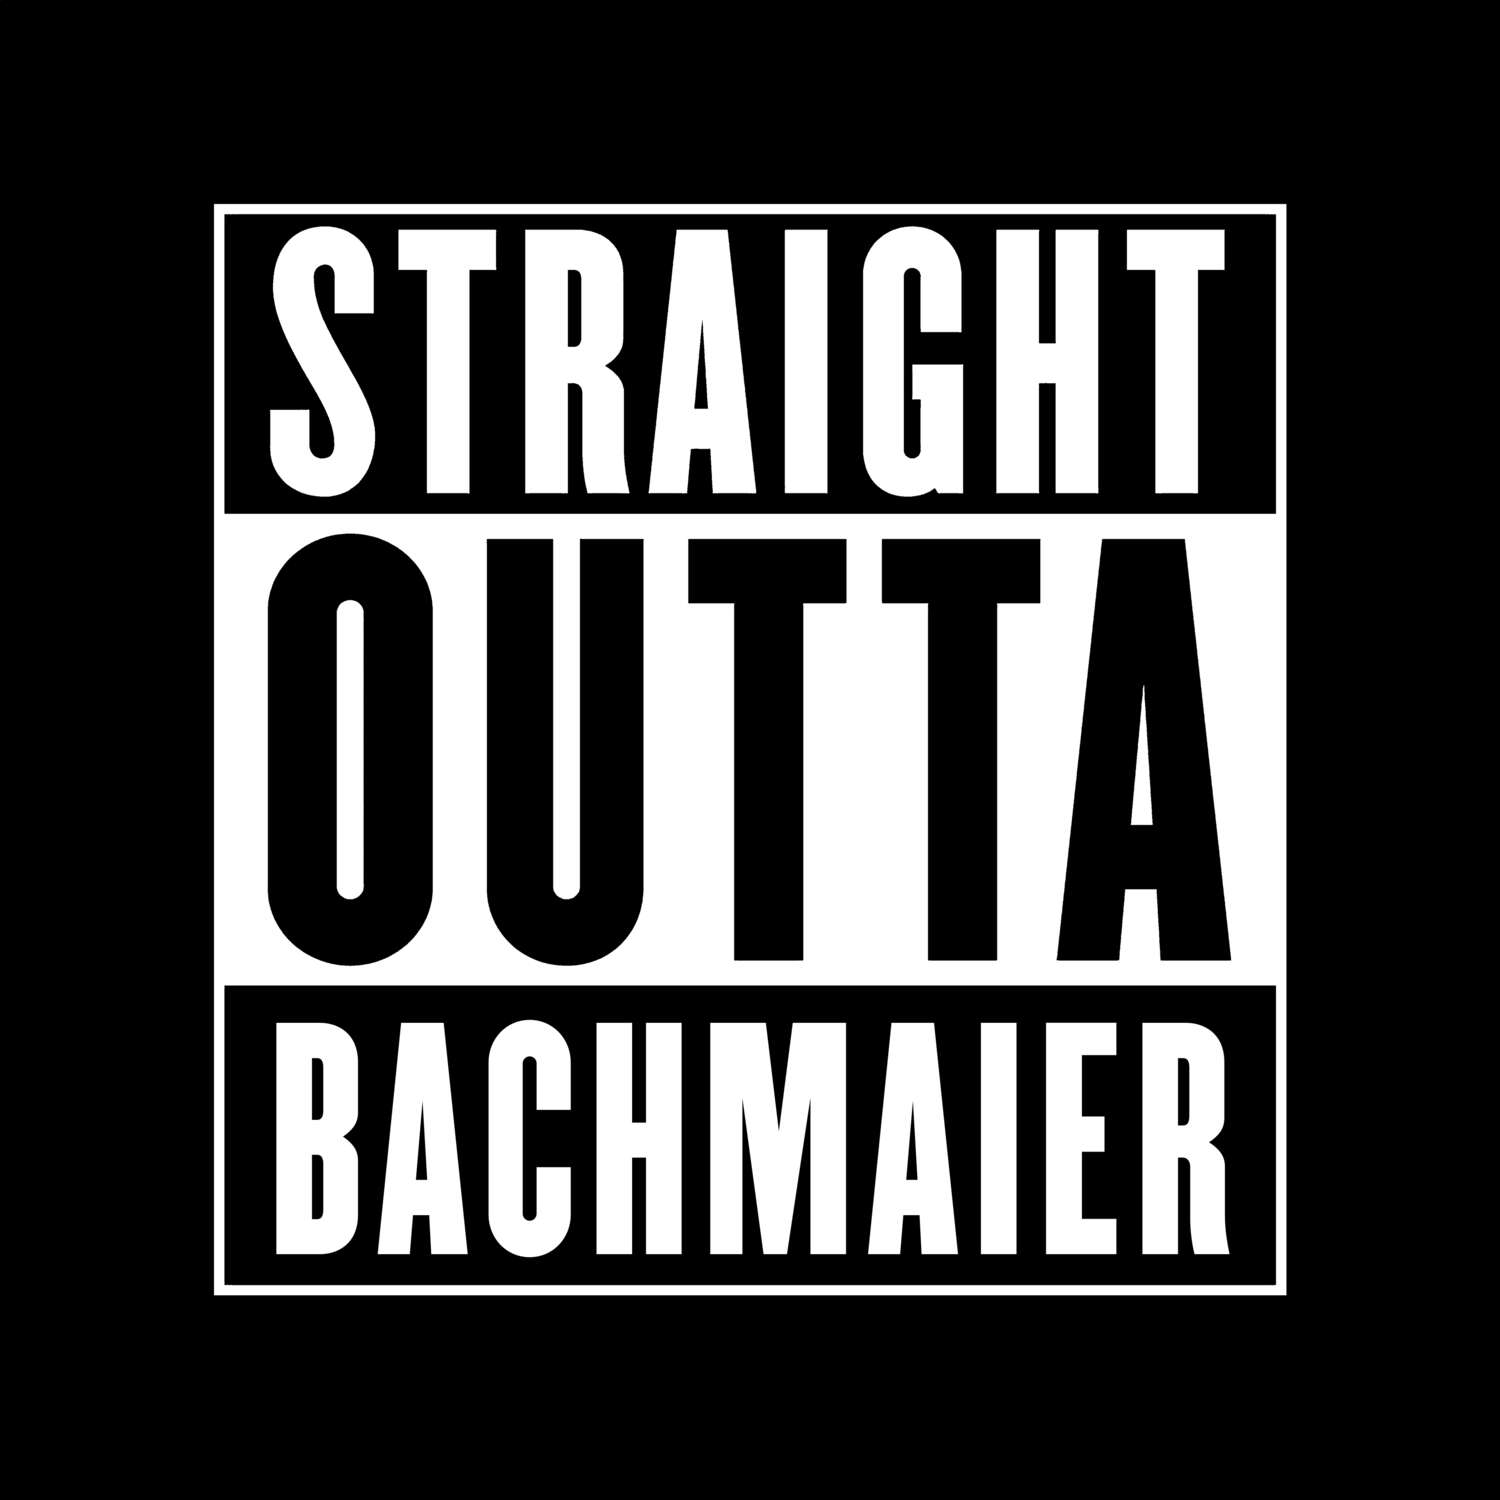 Bachmaier T-Shirt »Straight Outta«